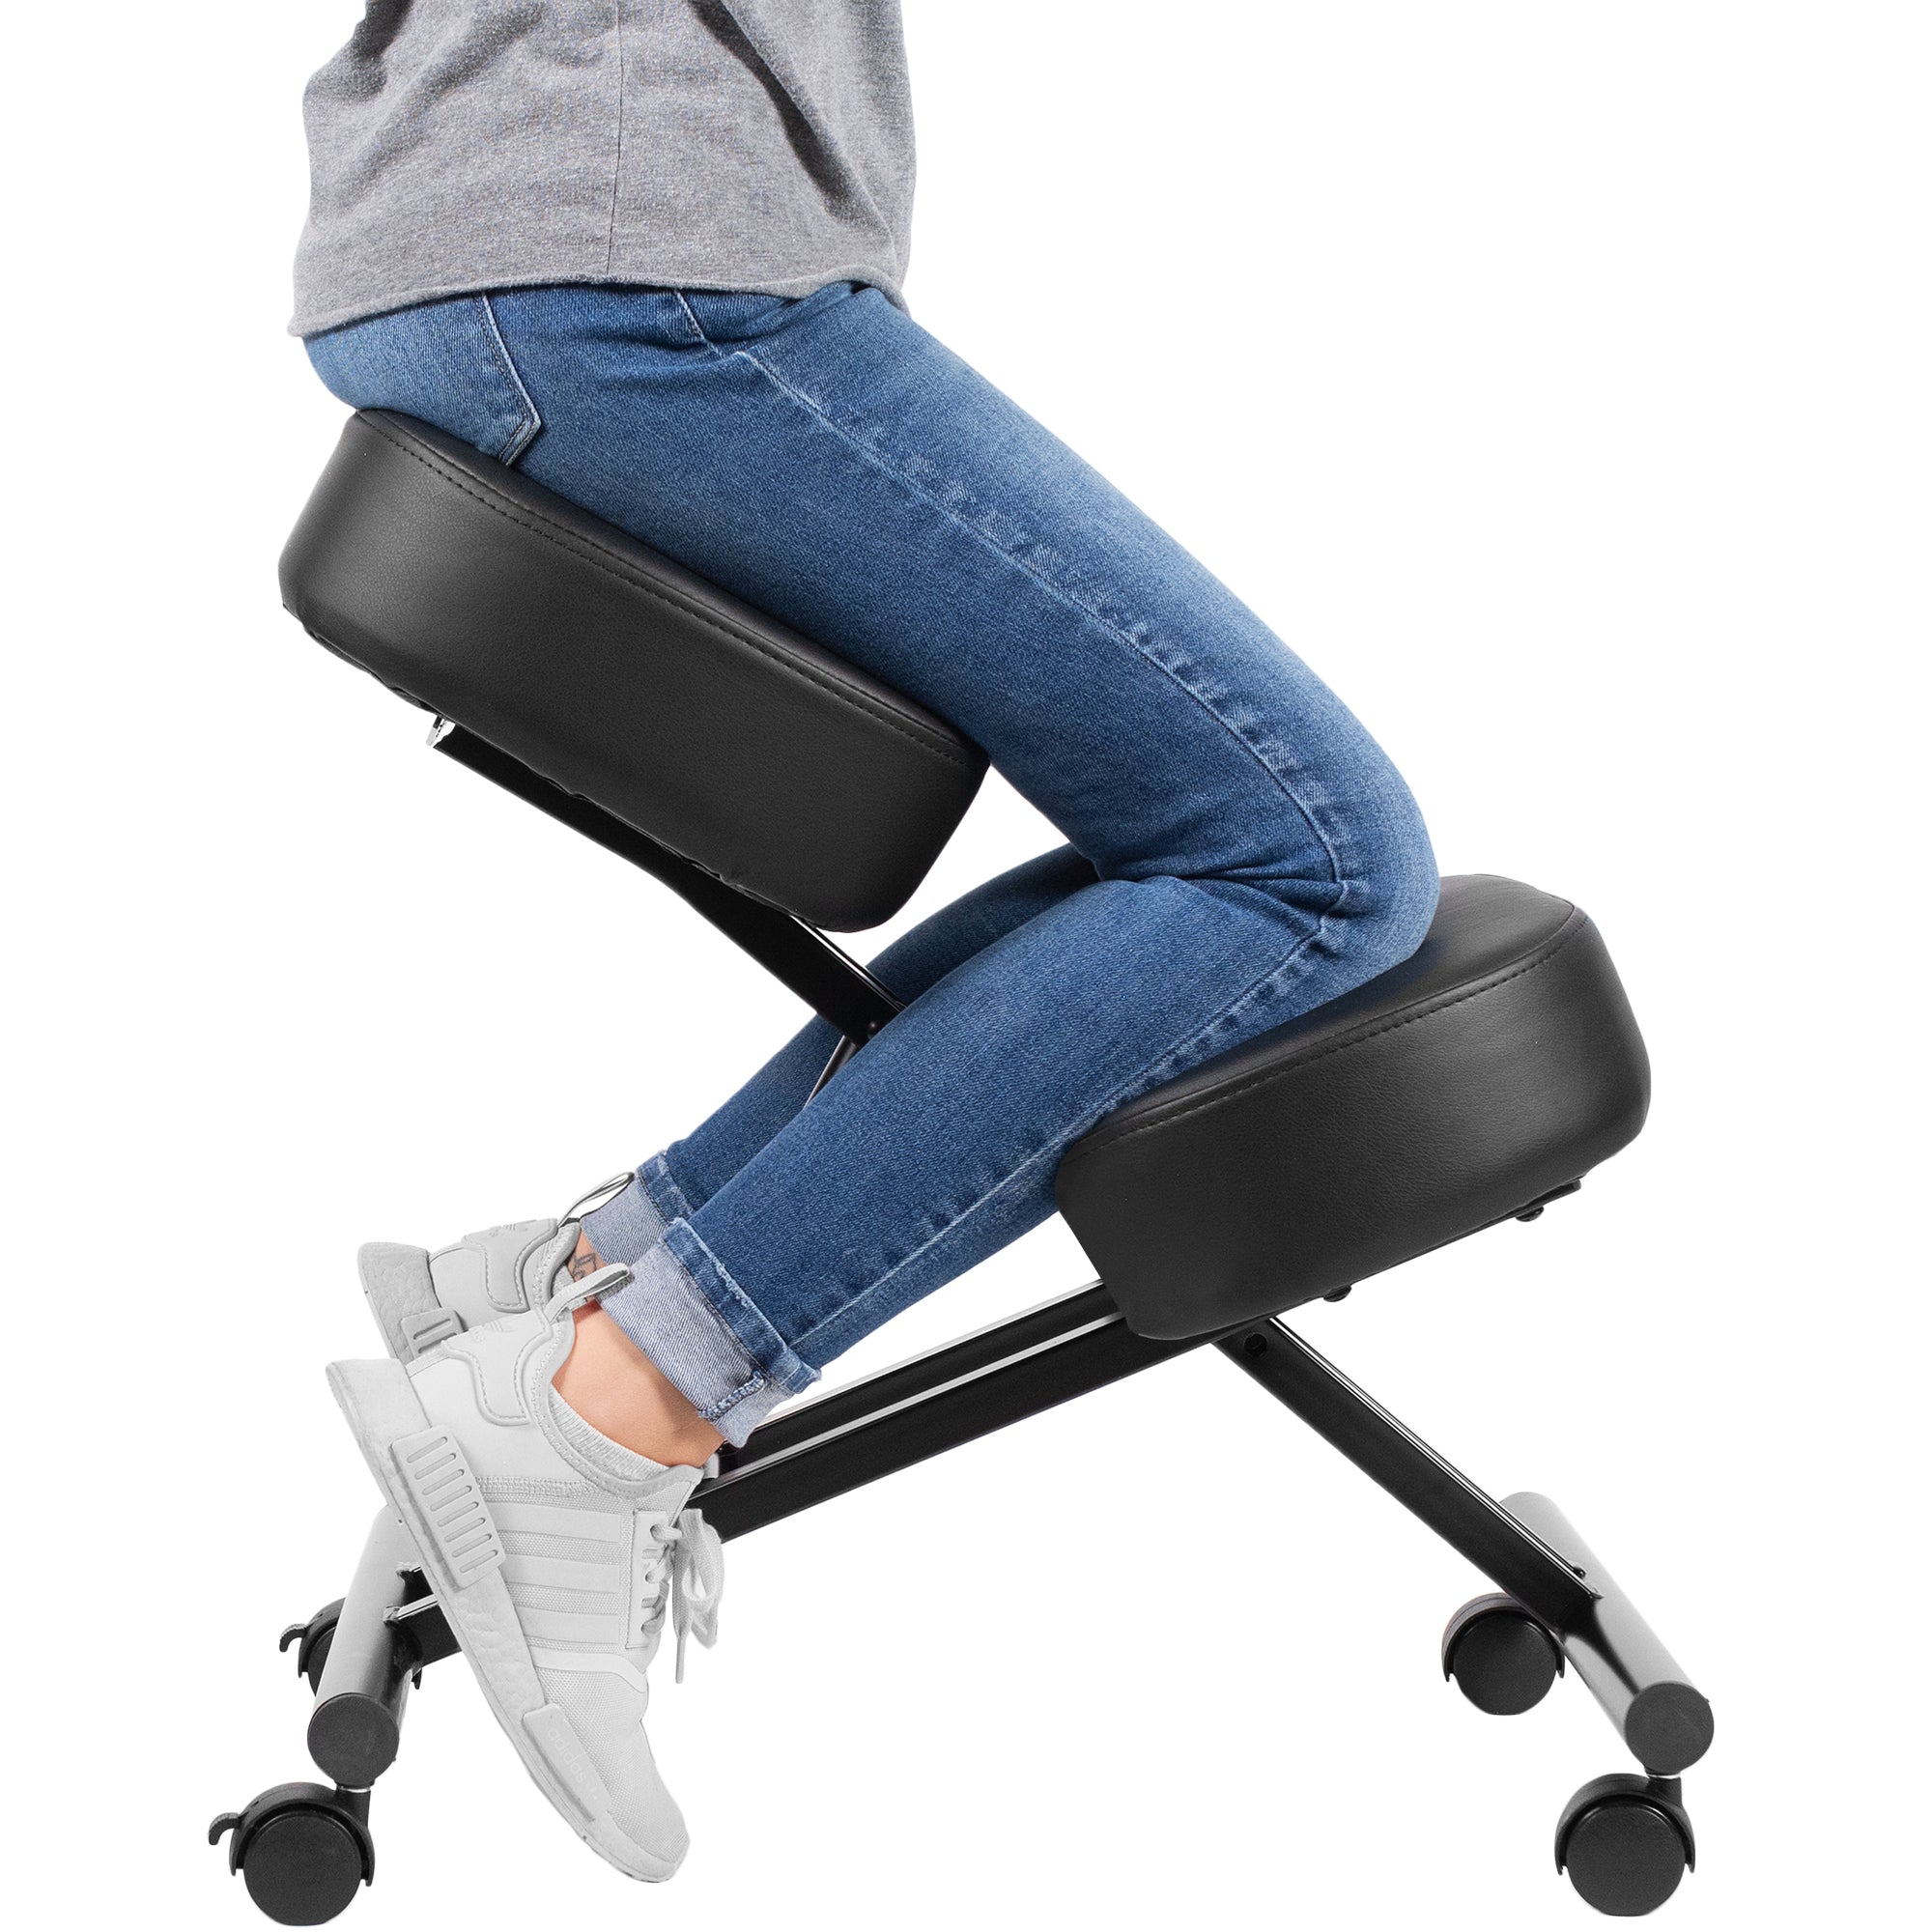 Ergonomic Chairs, Office Chairs for Bad Backs